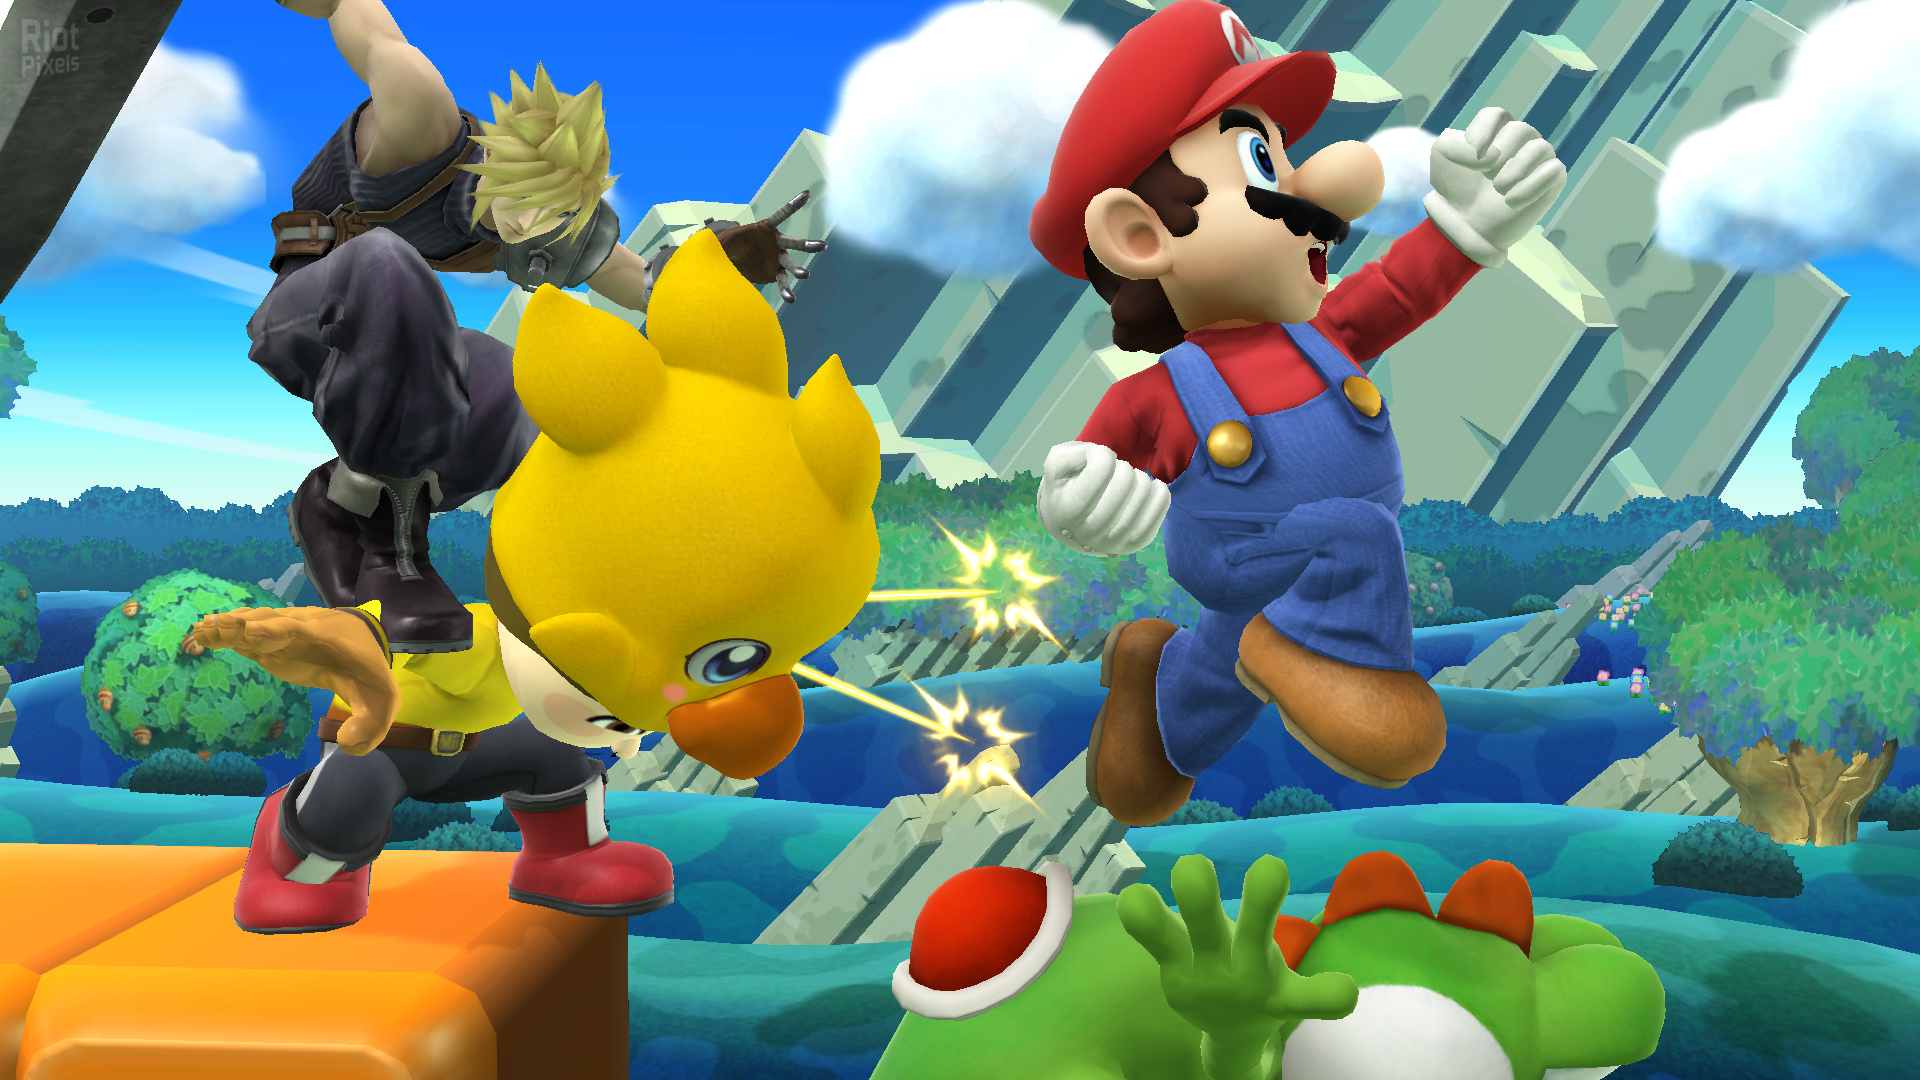 Super Smash Bros for 3DS Rom Download May 2015 on Vimeo